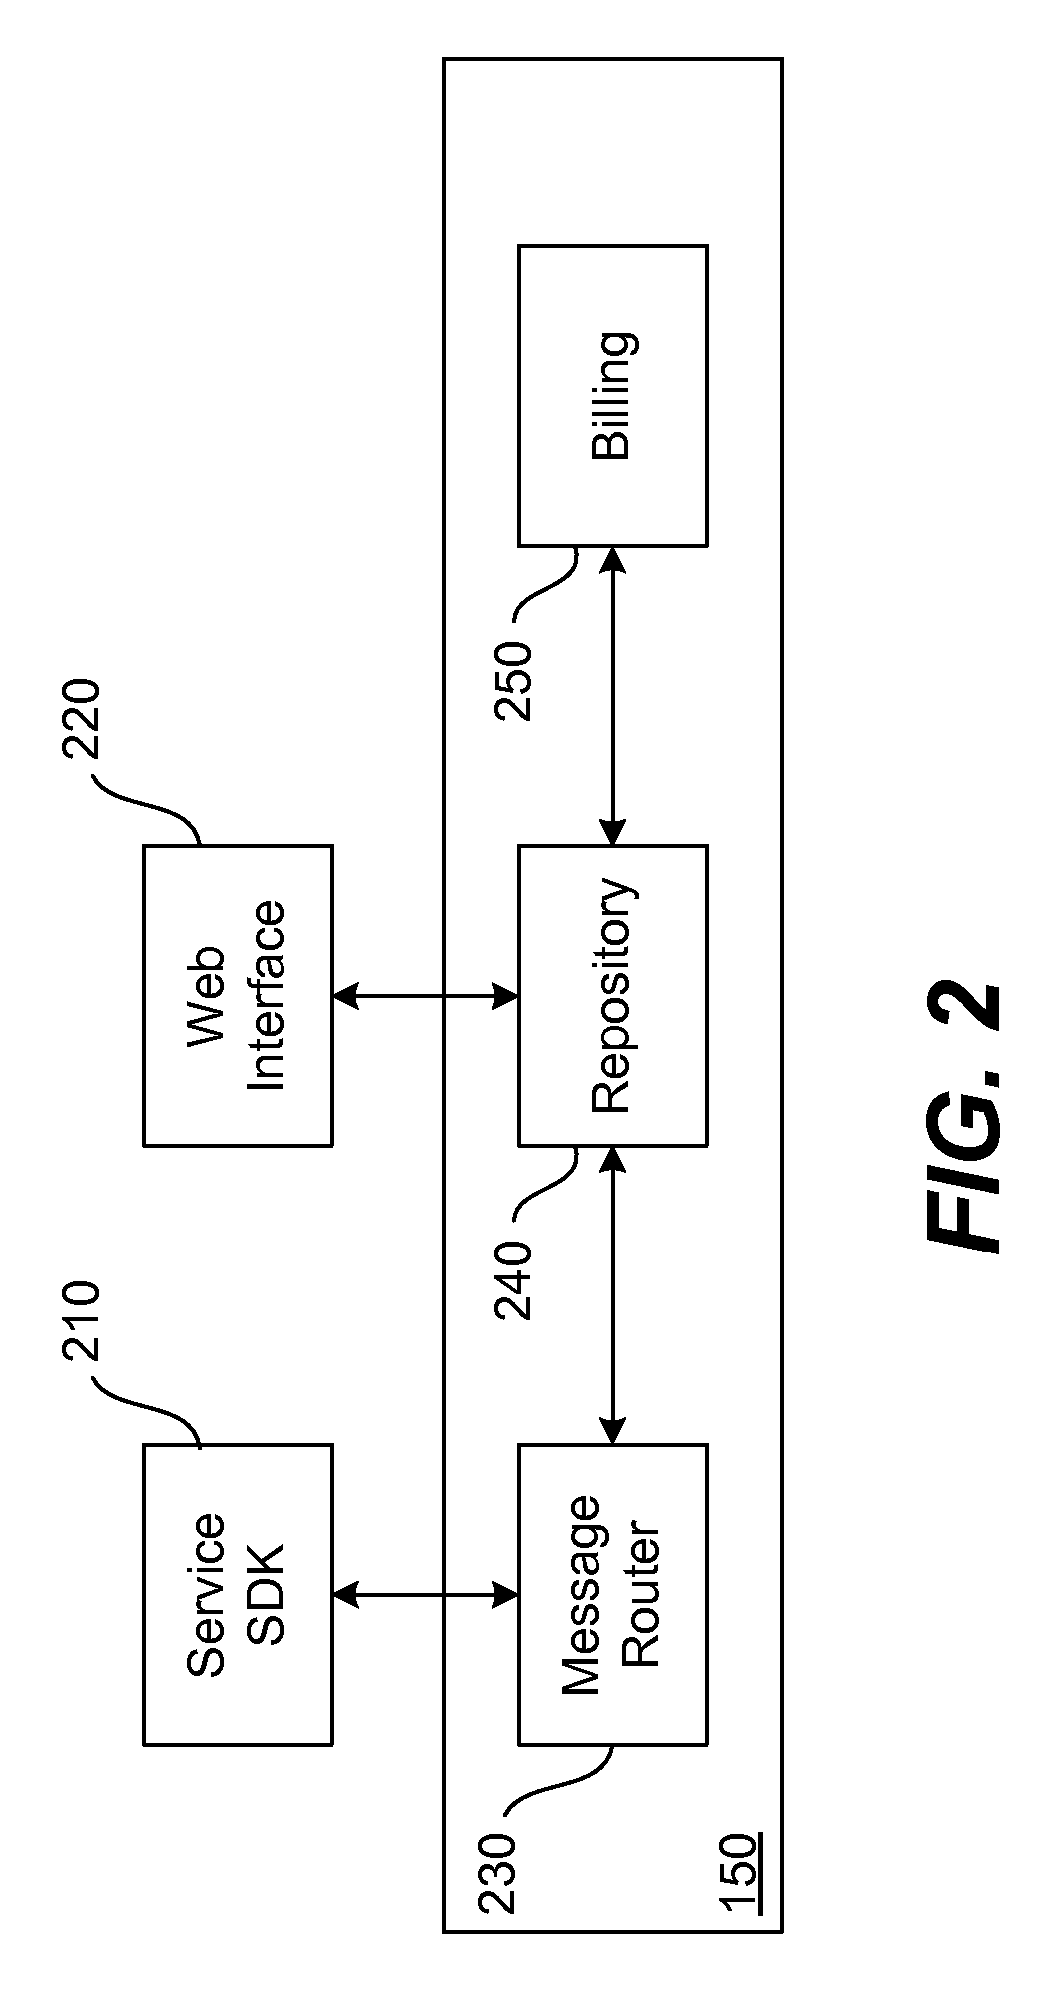 Apparatus and methods for managing messages sent between services